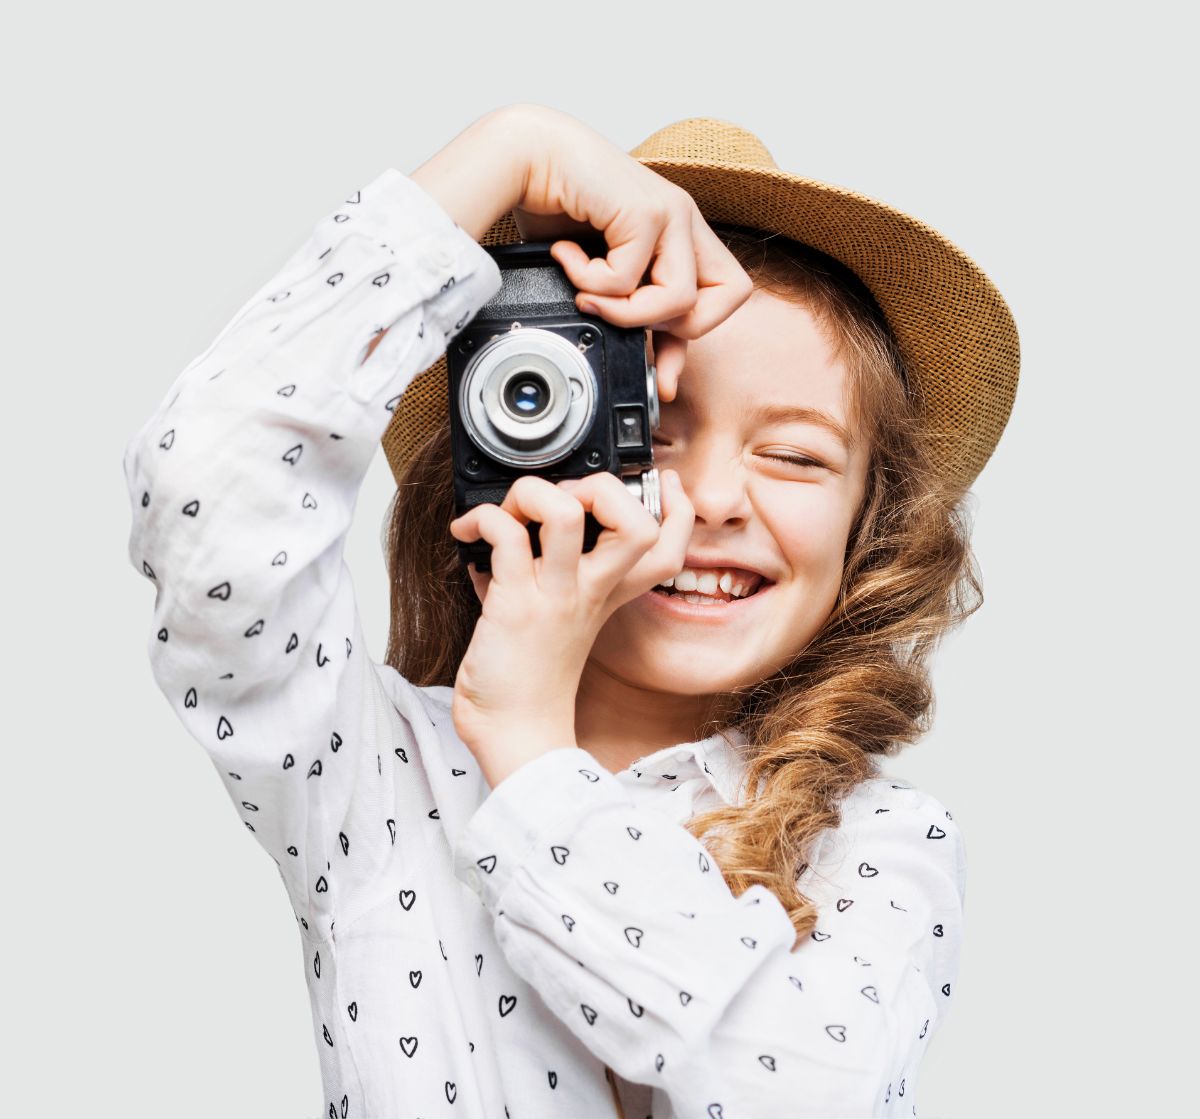 a girl in a white shirt with hearts and a straw hat faces the camera holding a camera up her face as if taking a photo